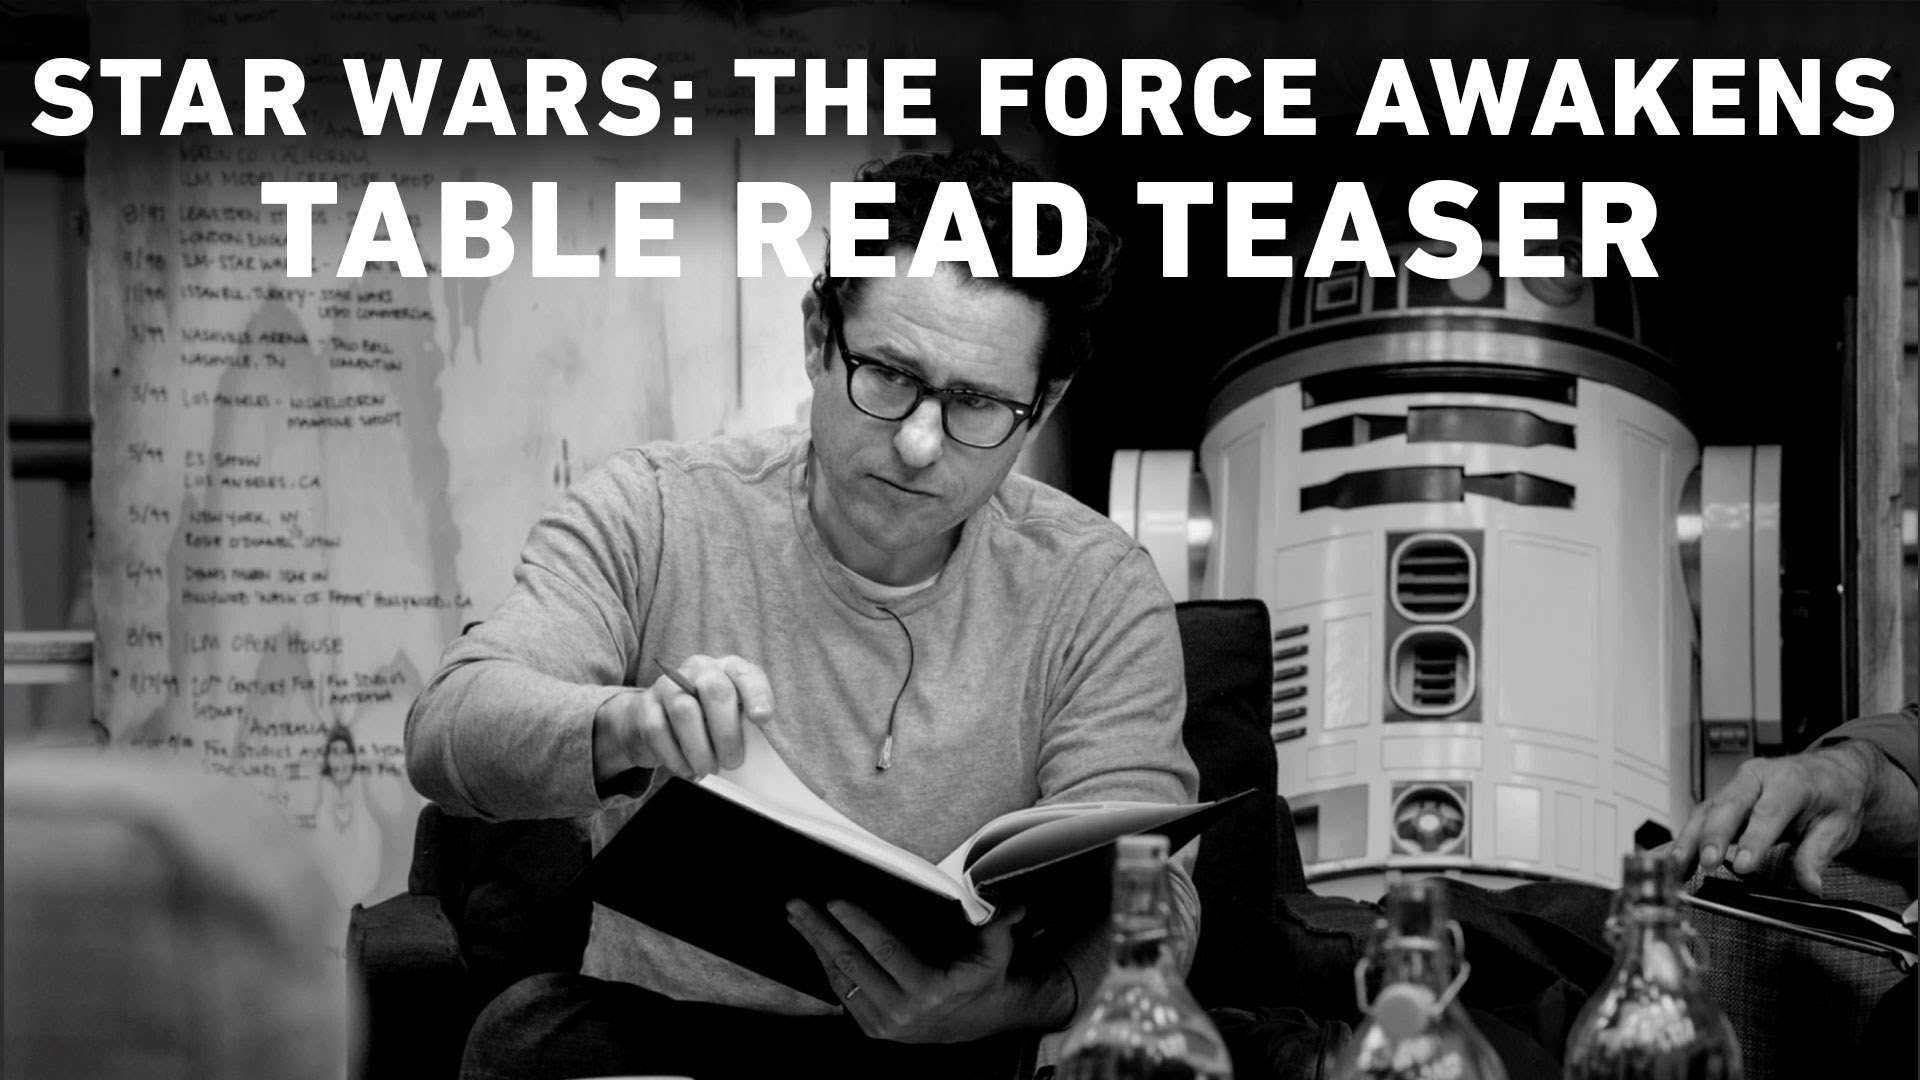 Star Wars: The Force Awakens Table Read Teaser